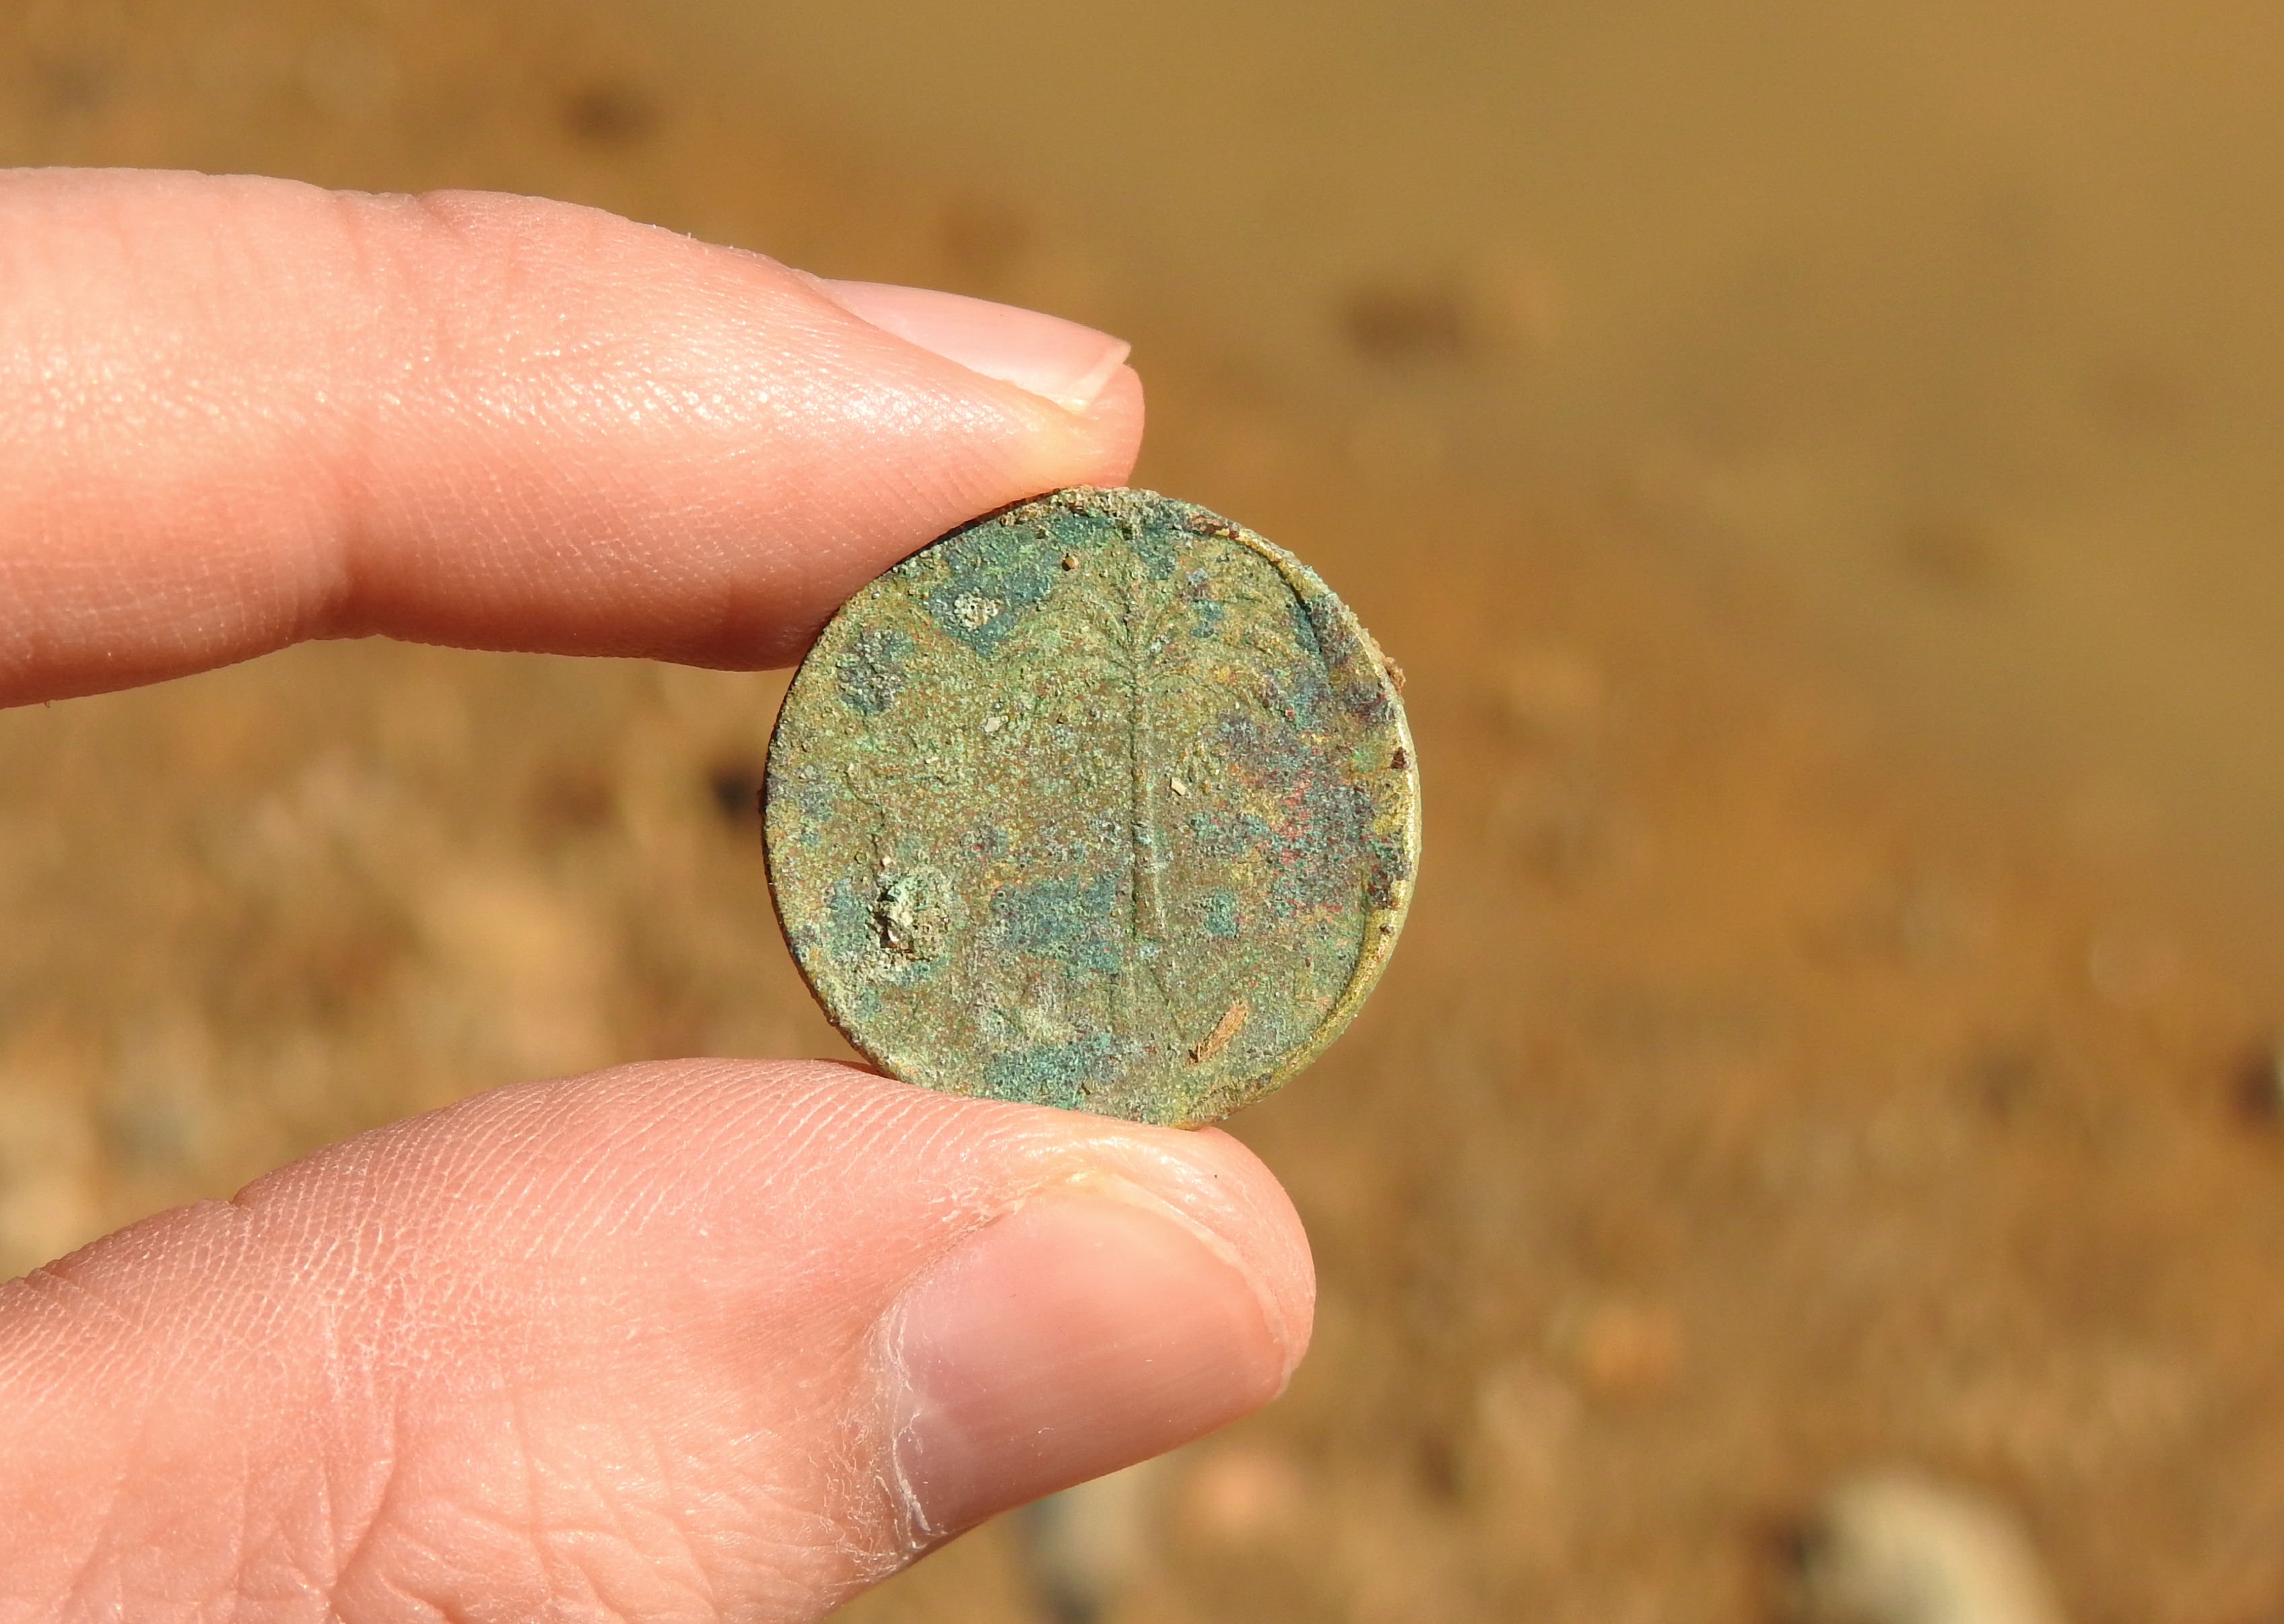 Some old Israeli coin